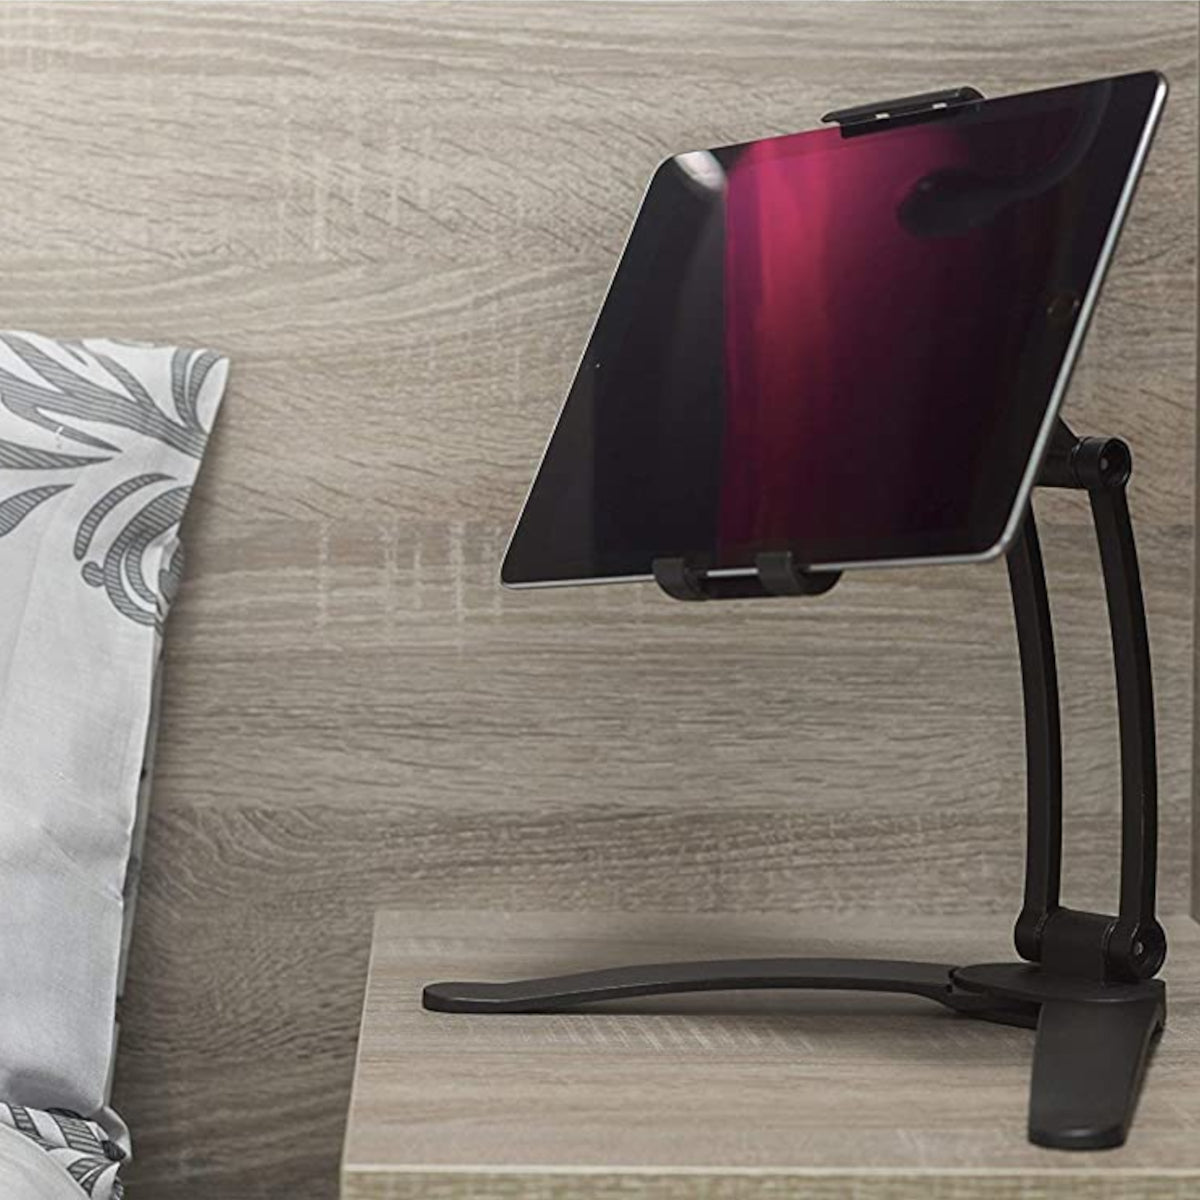 An Apple Ipad in a tablet stand on a bedside table in a bedroom with grey wood effect walls and table